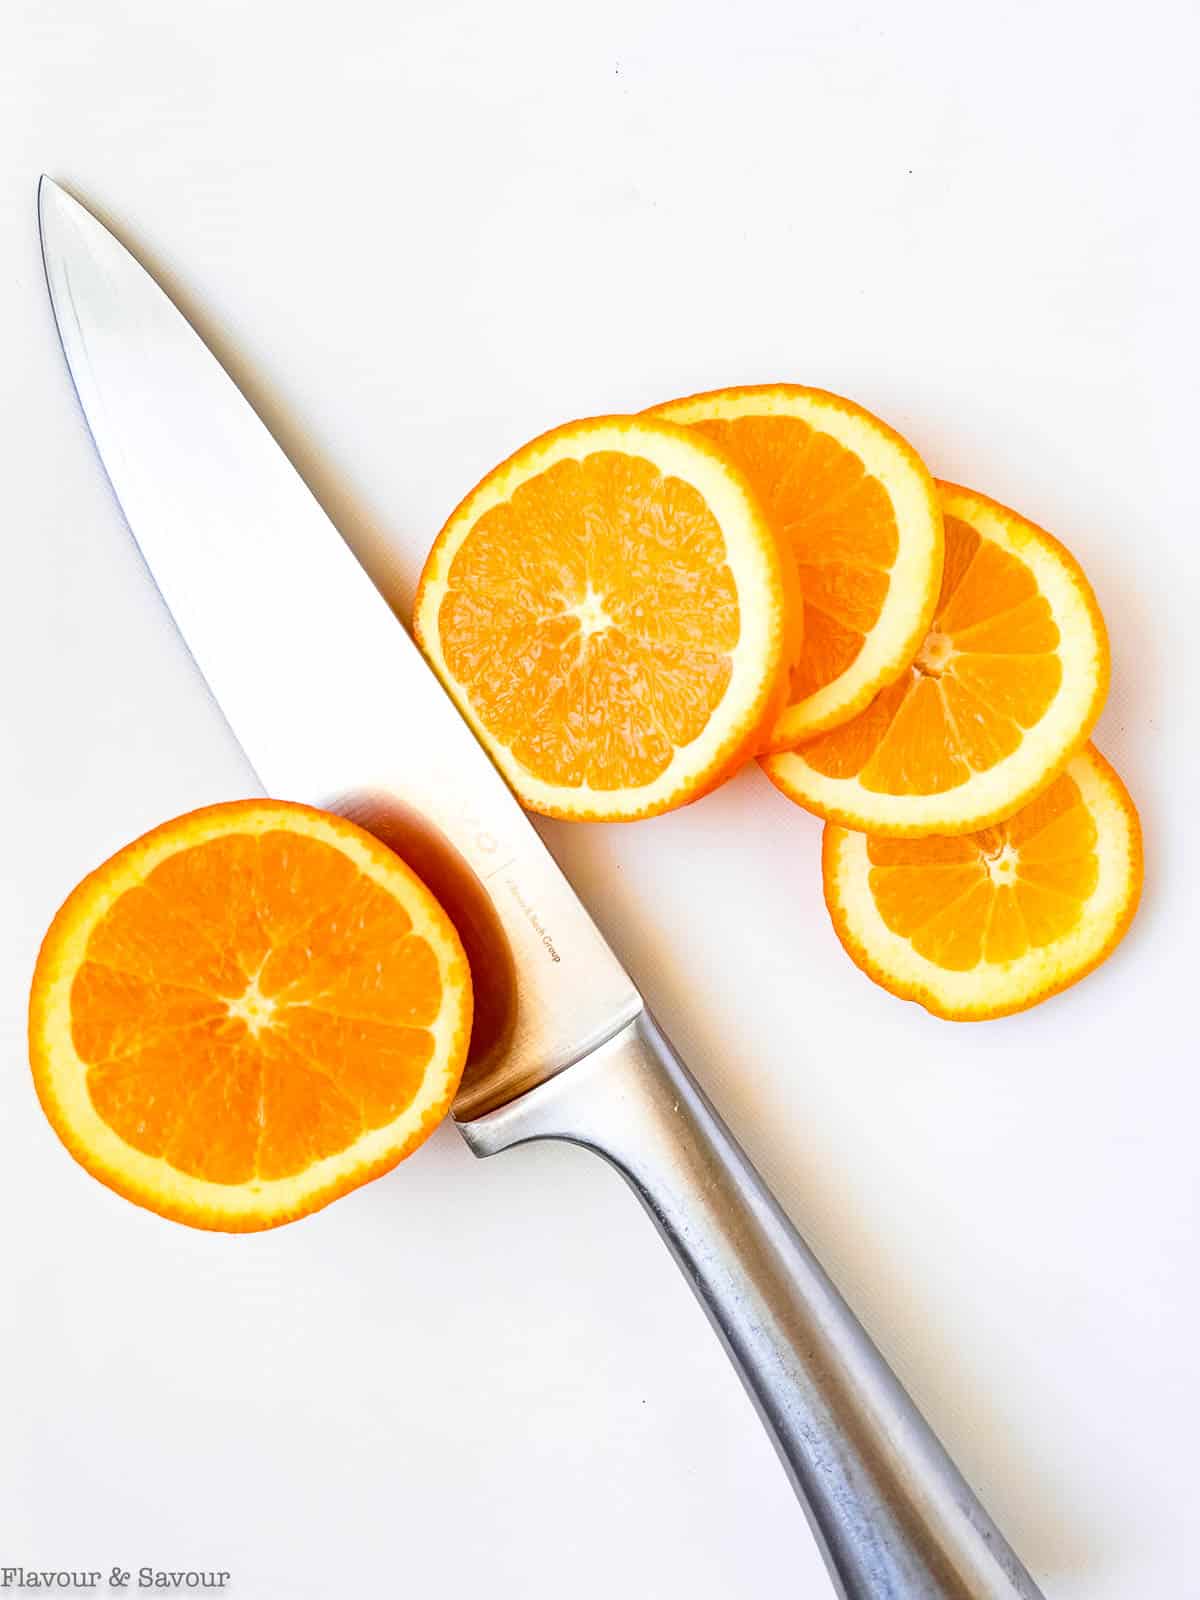 Sliced oranges with a knife to make dried orange slices.